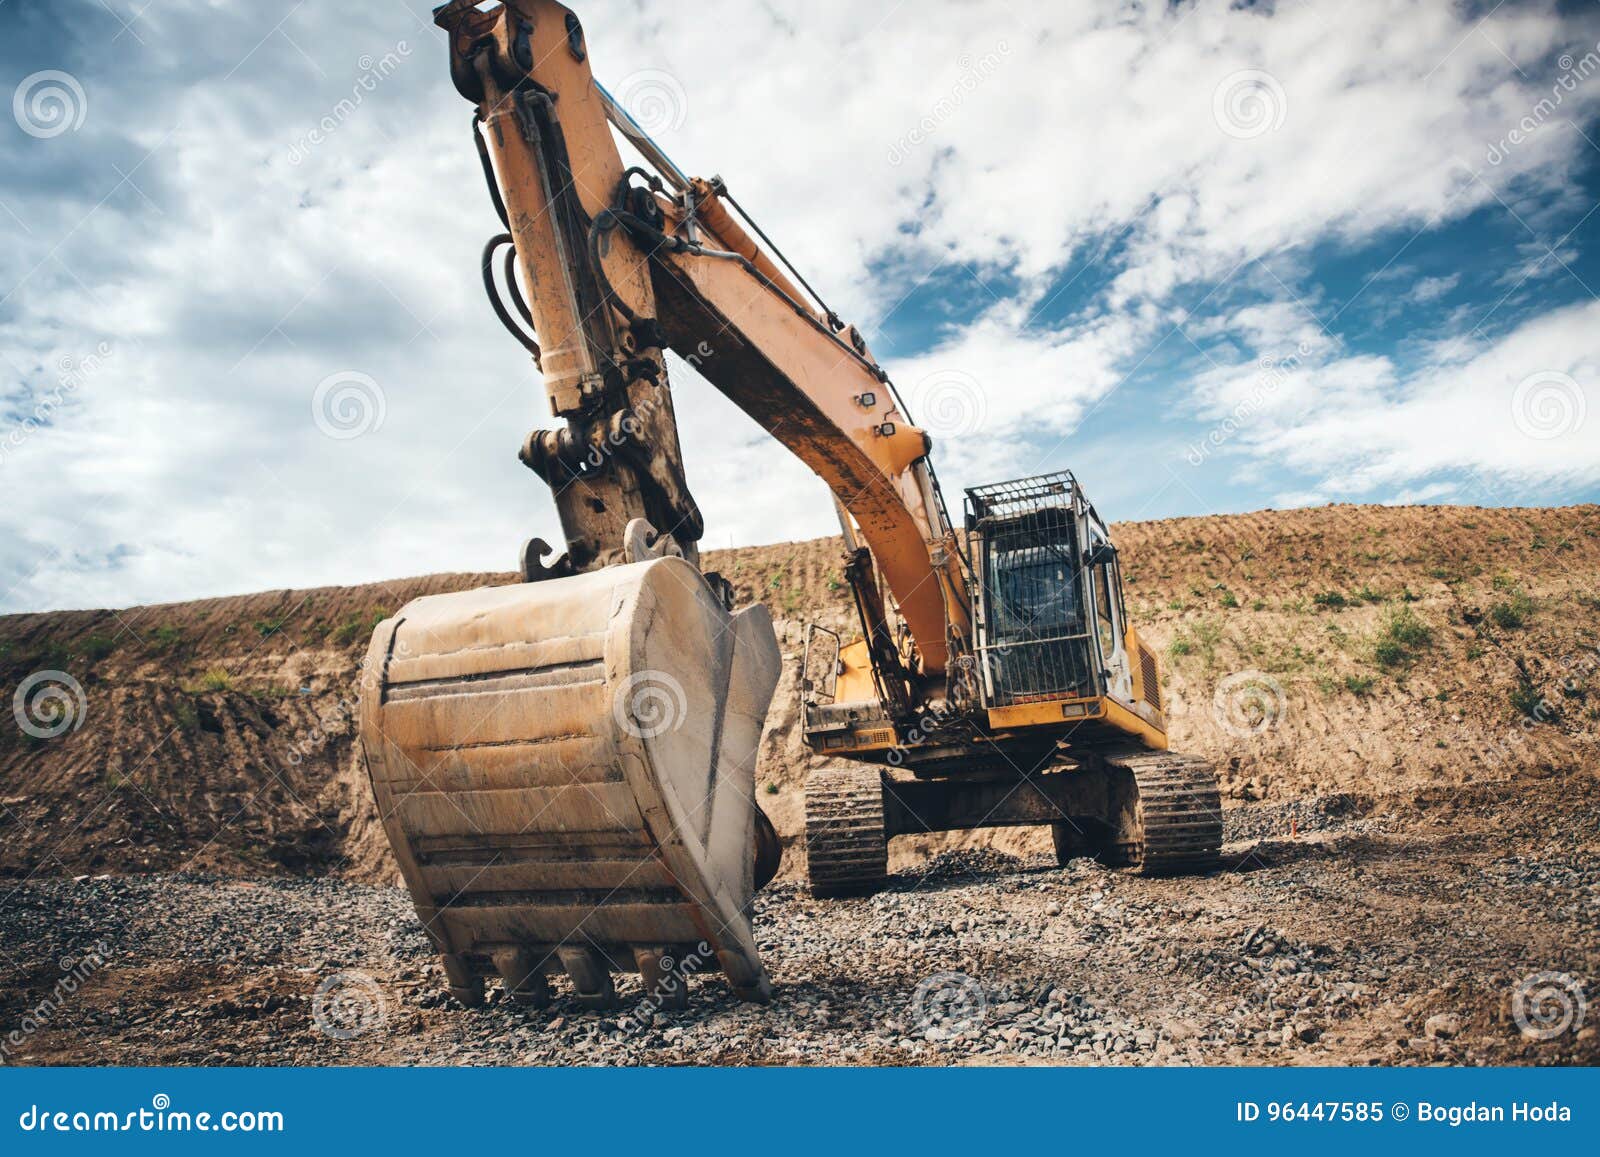 site excavator. details of roadworks with heavy duty machinery